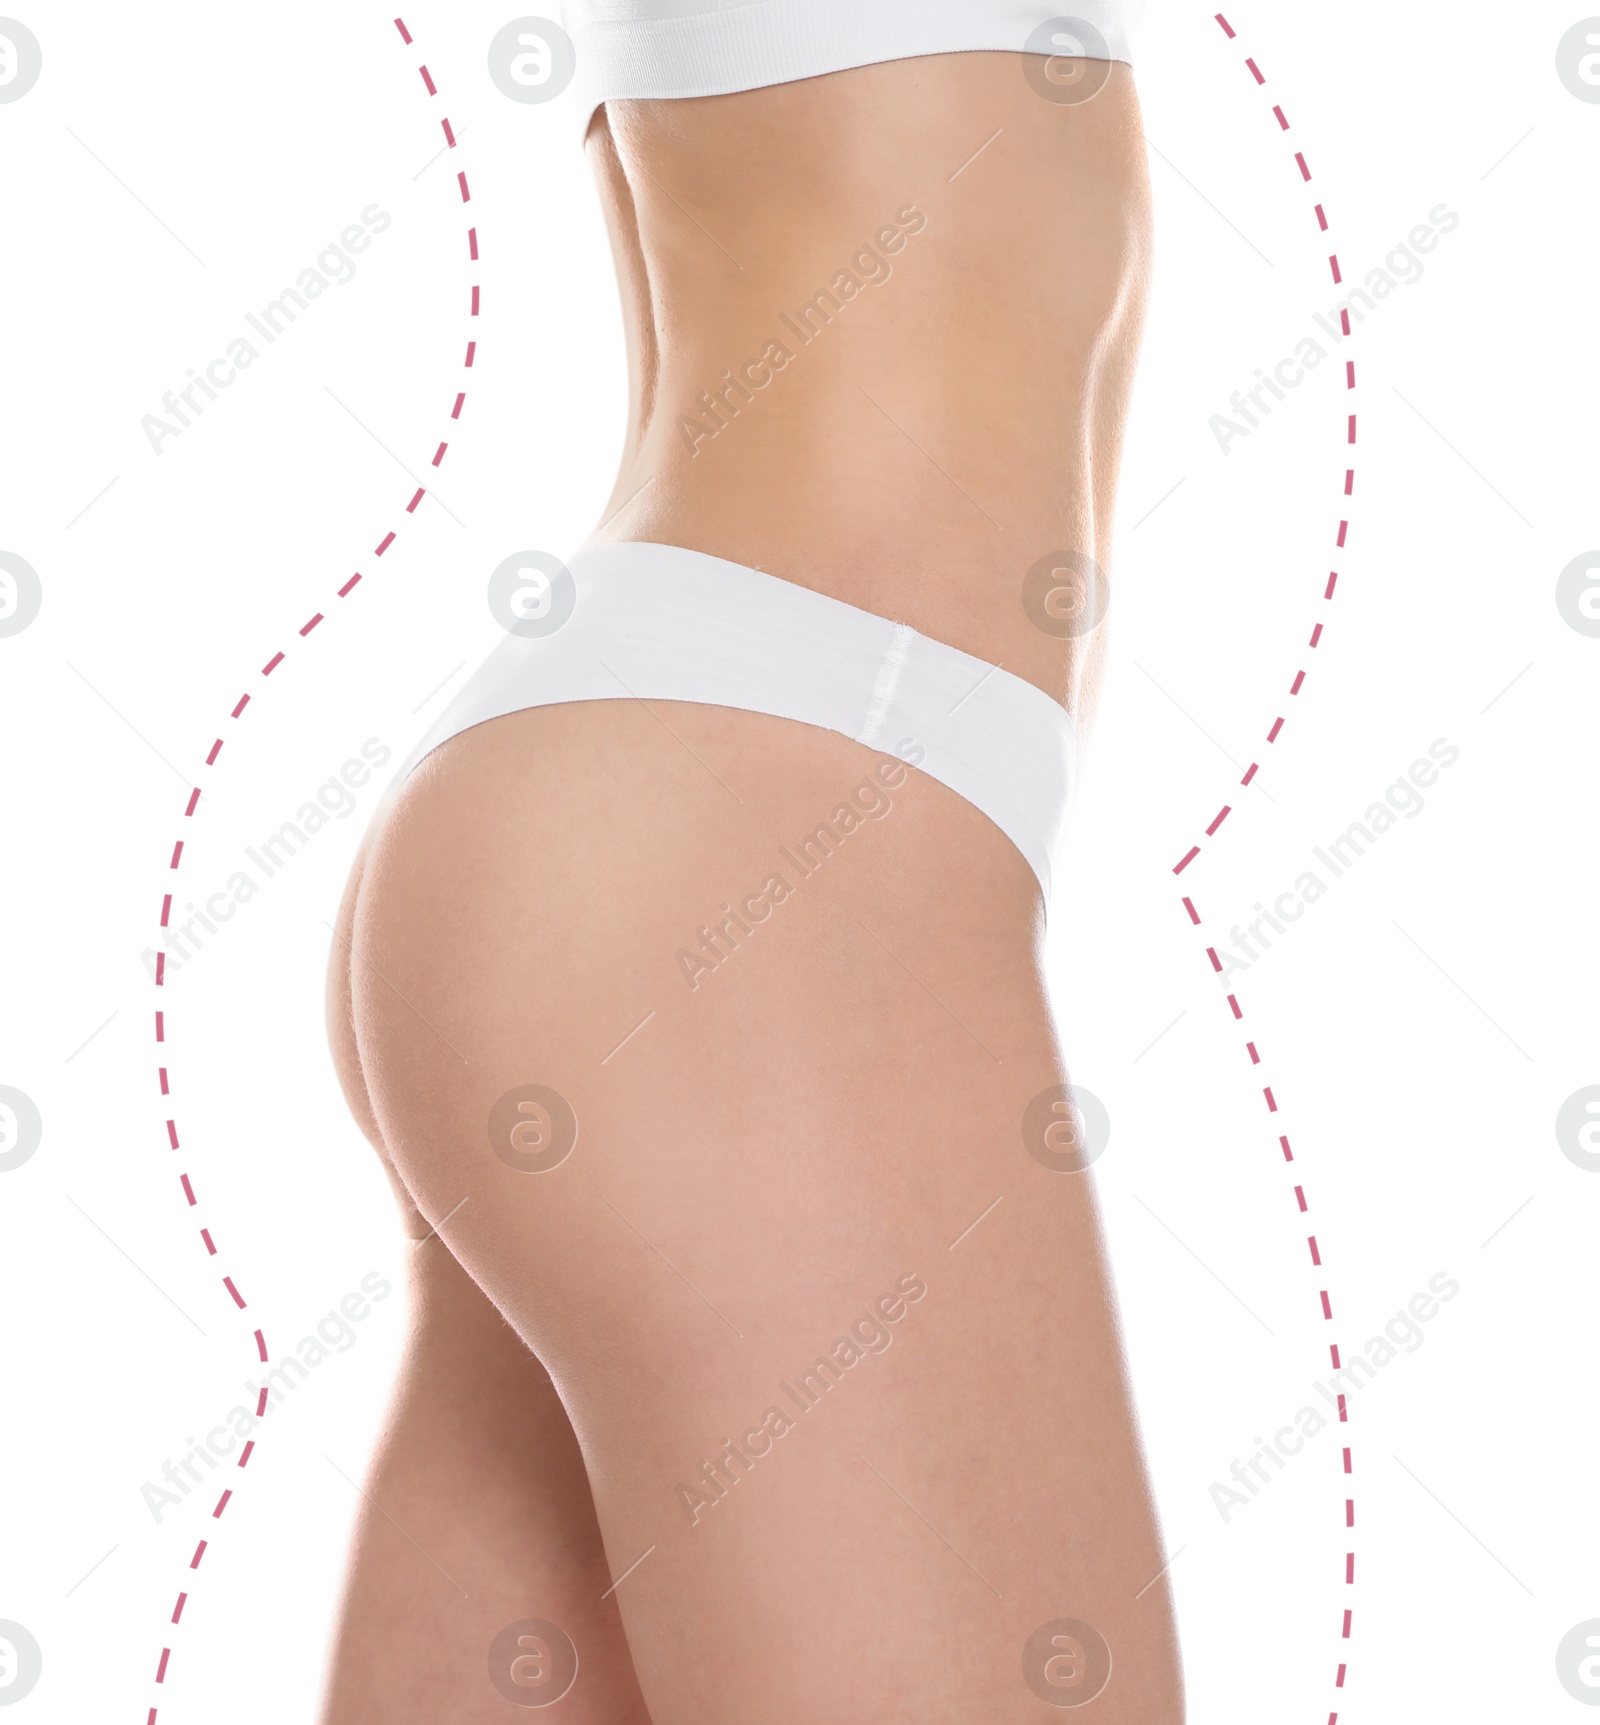 Image of Slim woman in underwear after weight loss on white background. Healthy diet